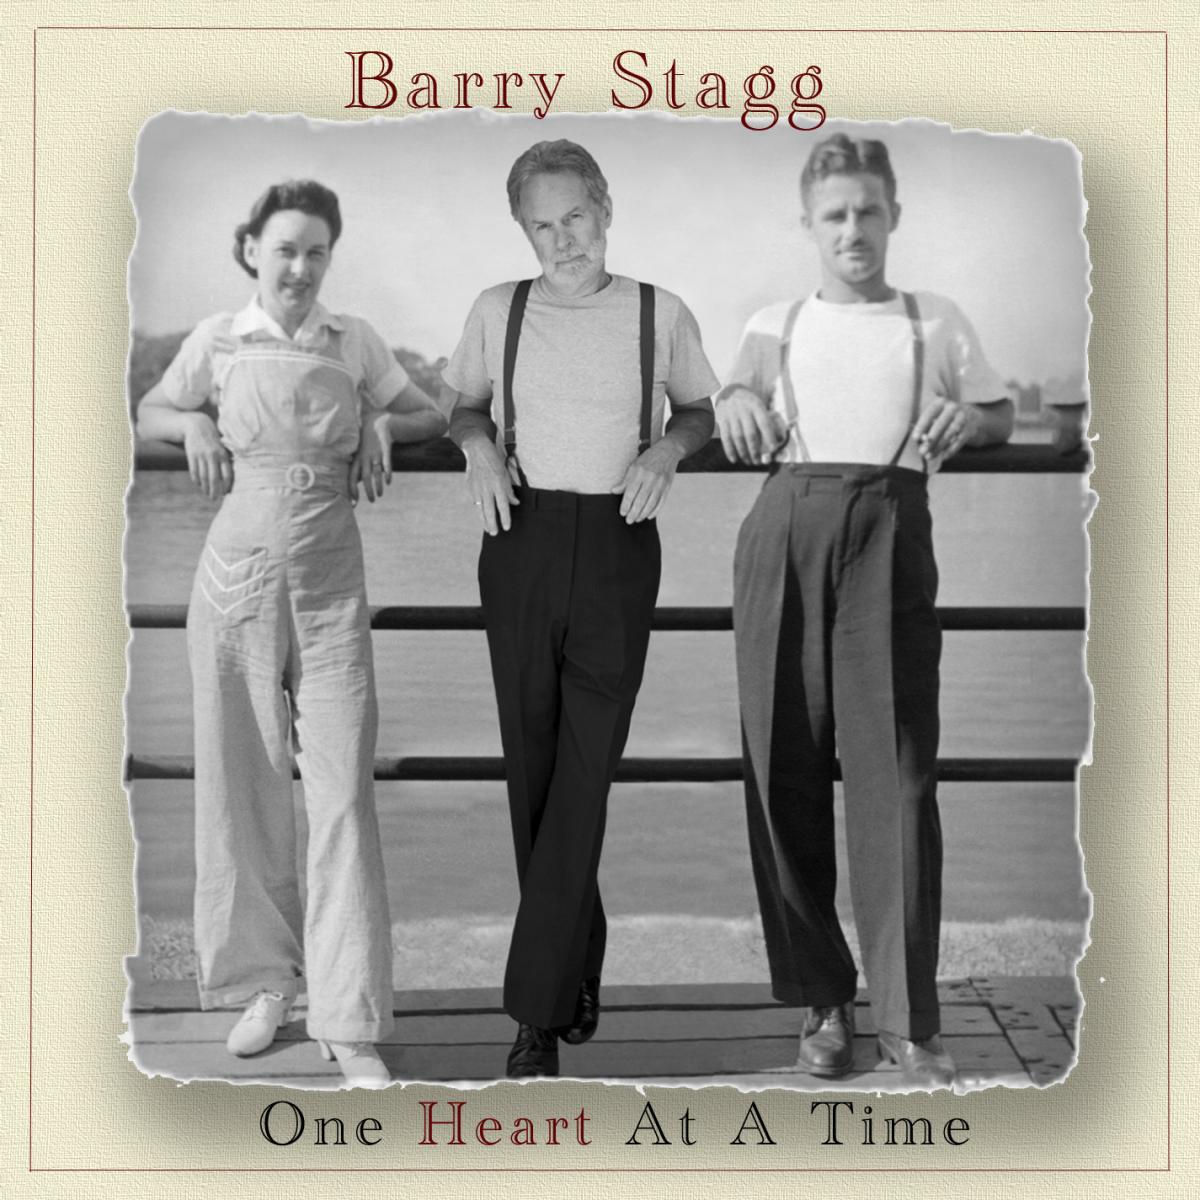 Barry Stagg Capturing ‘One Heart At A Time’